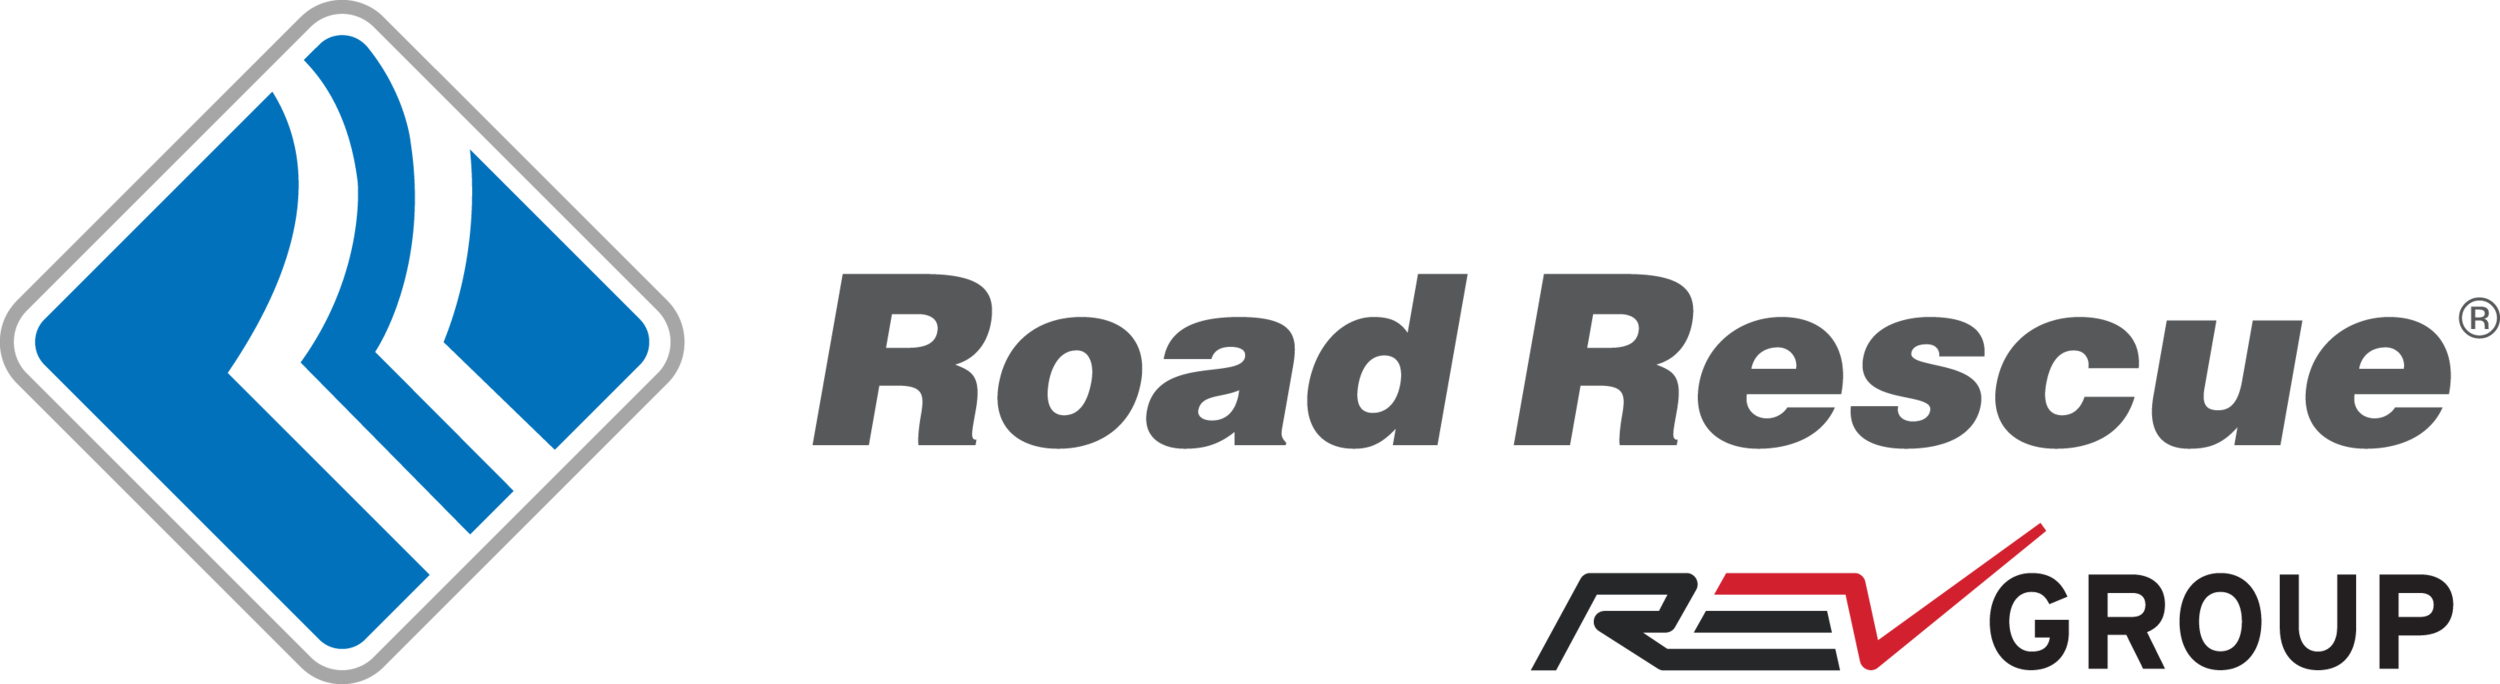 Road Rescue - REV Group (1).png